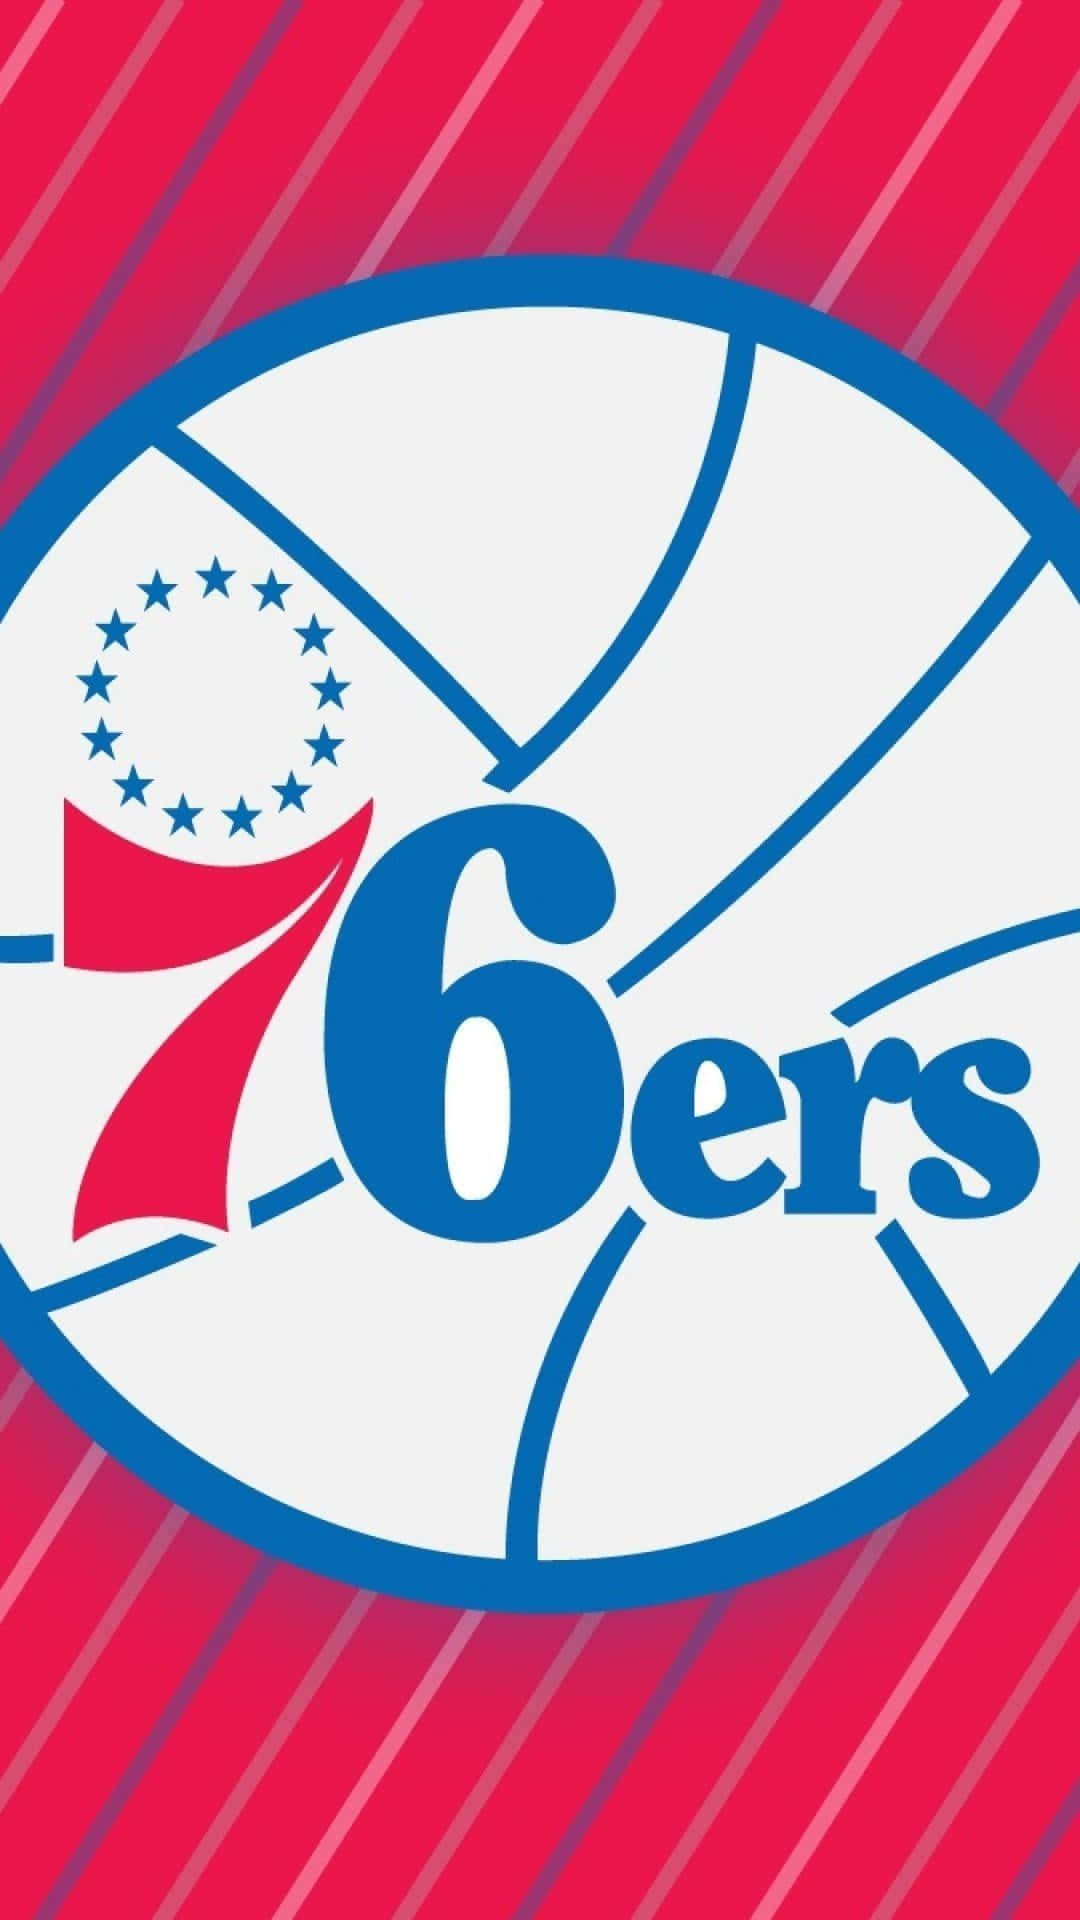 Get The Latest 76ers News Right On Your Iphone Wallpaper